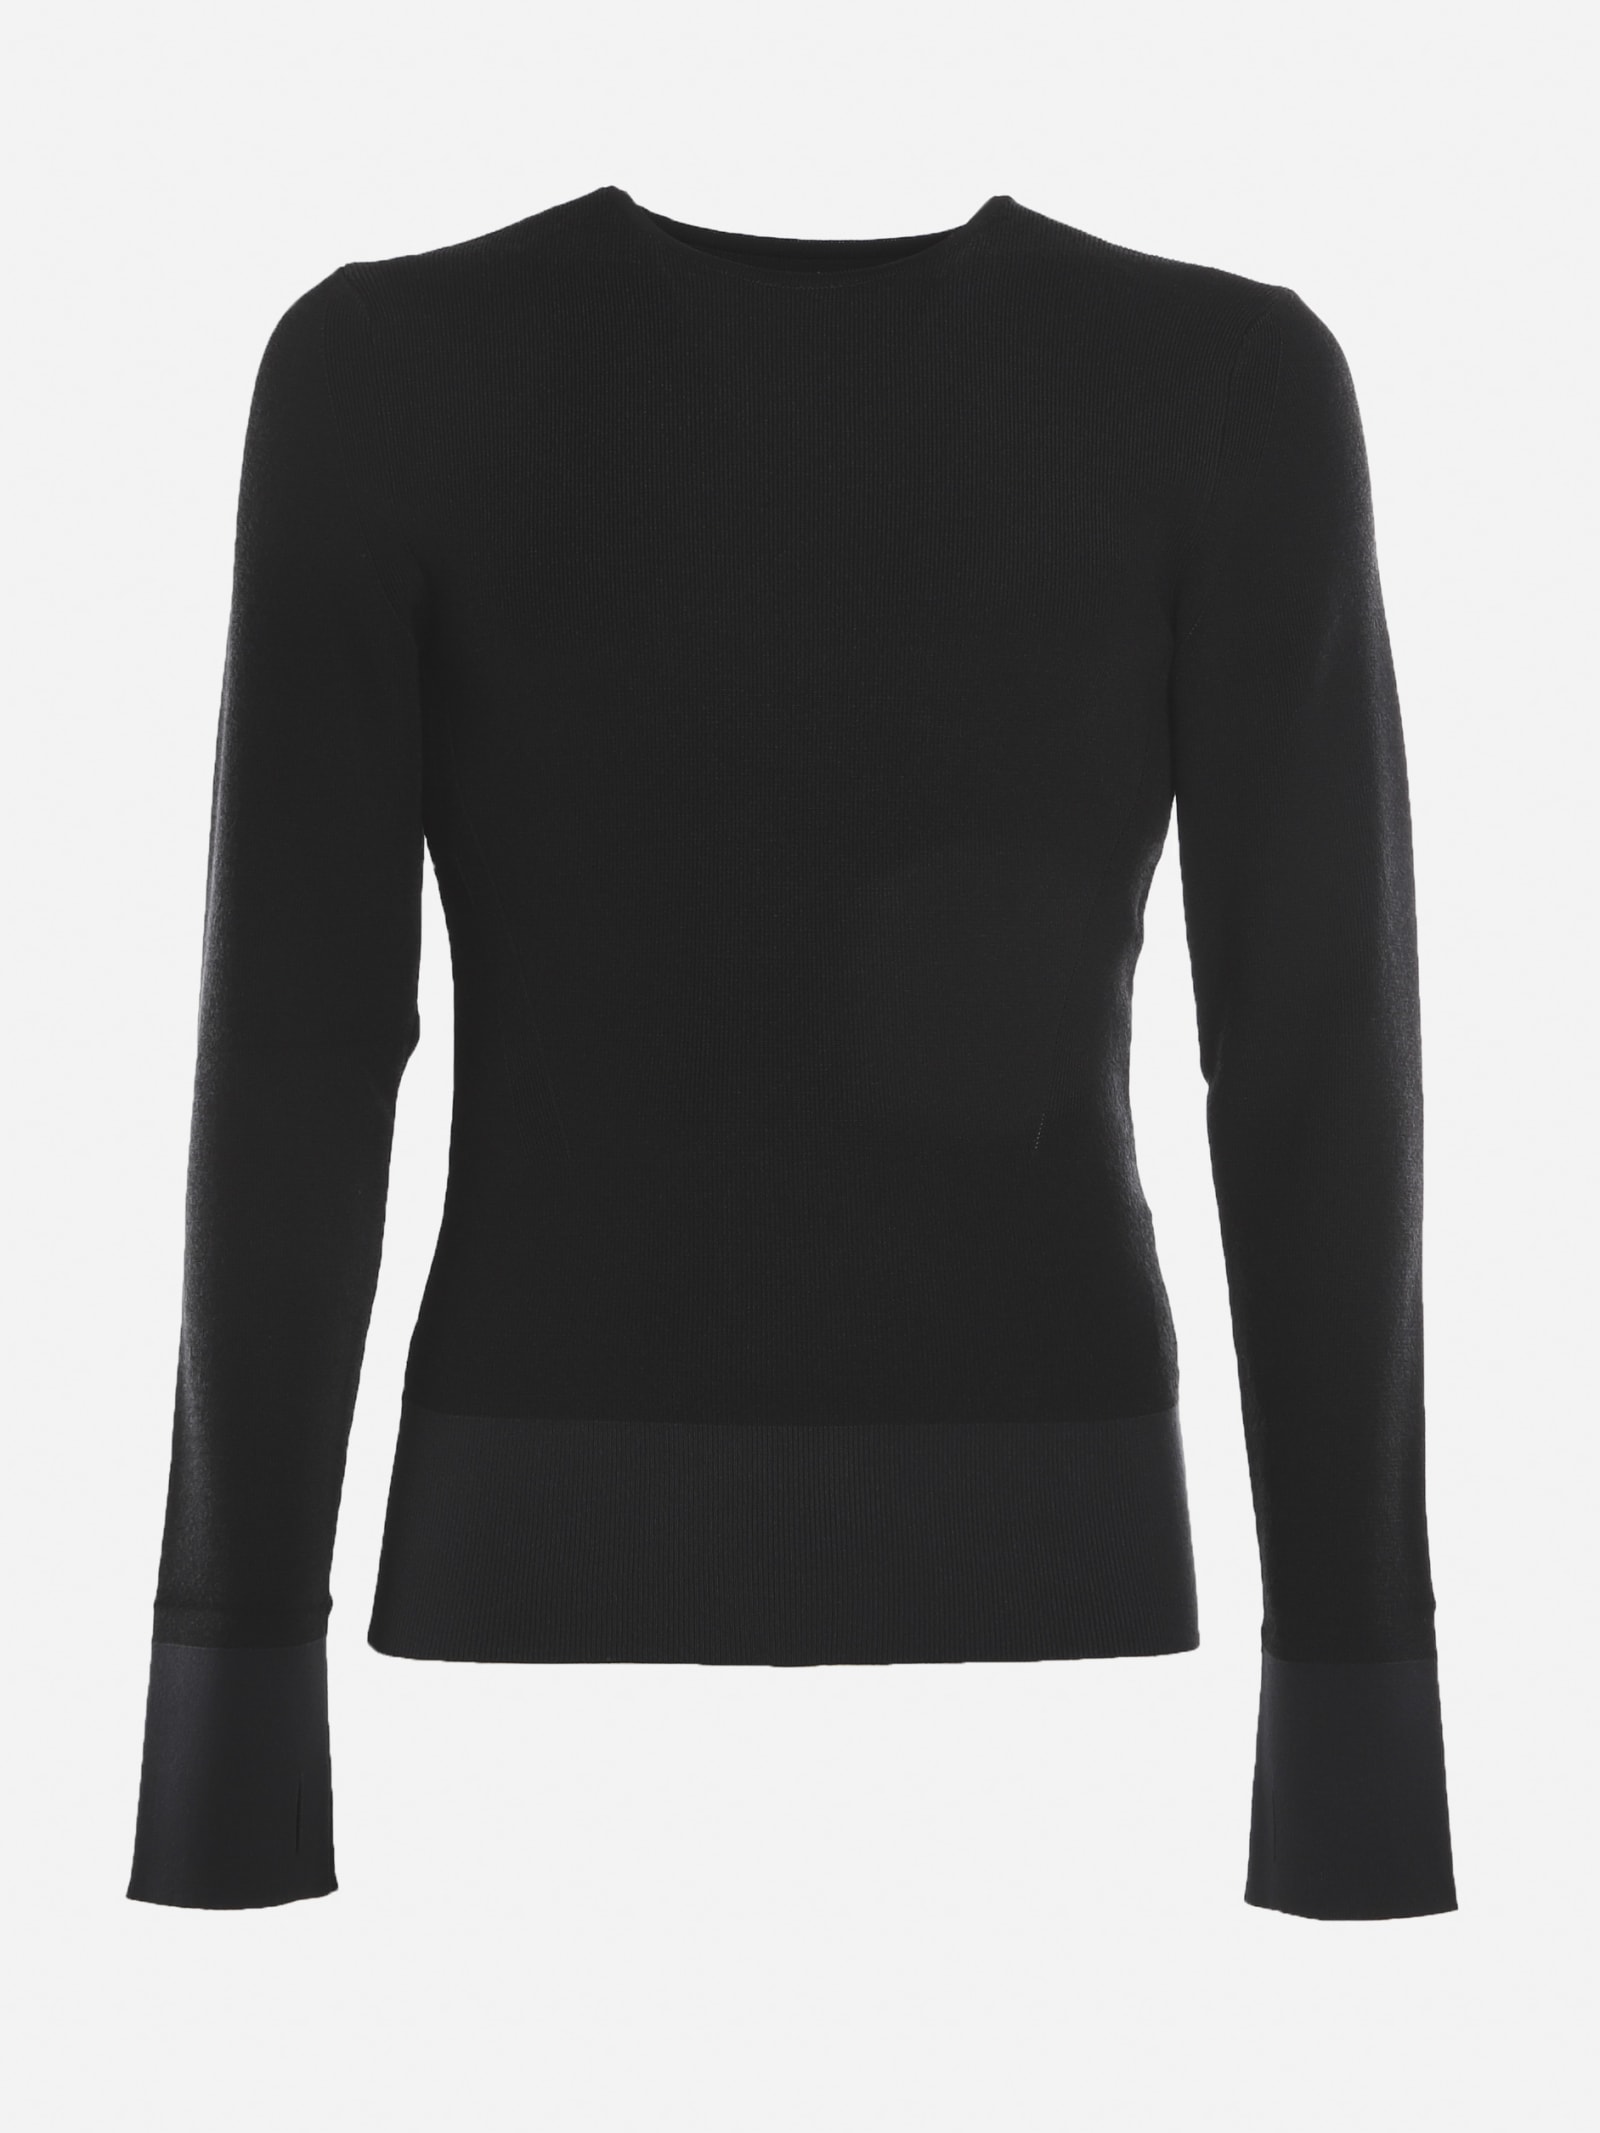 Jacquemus La Seconde Peau Sweater With Contrasting Inserts